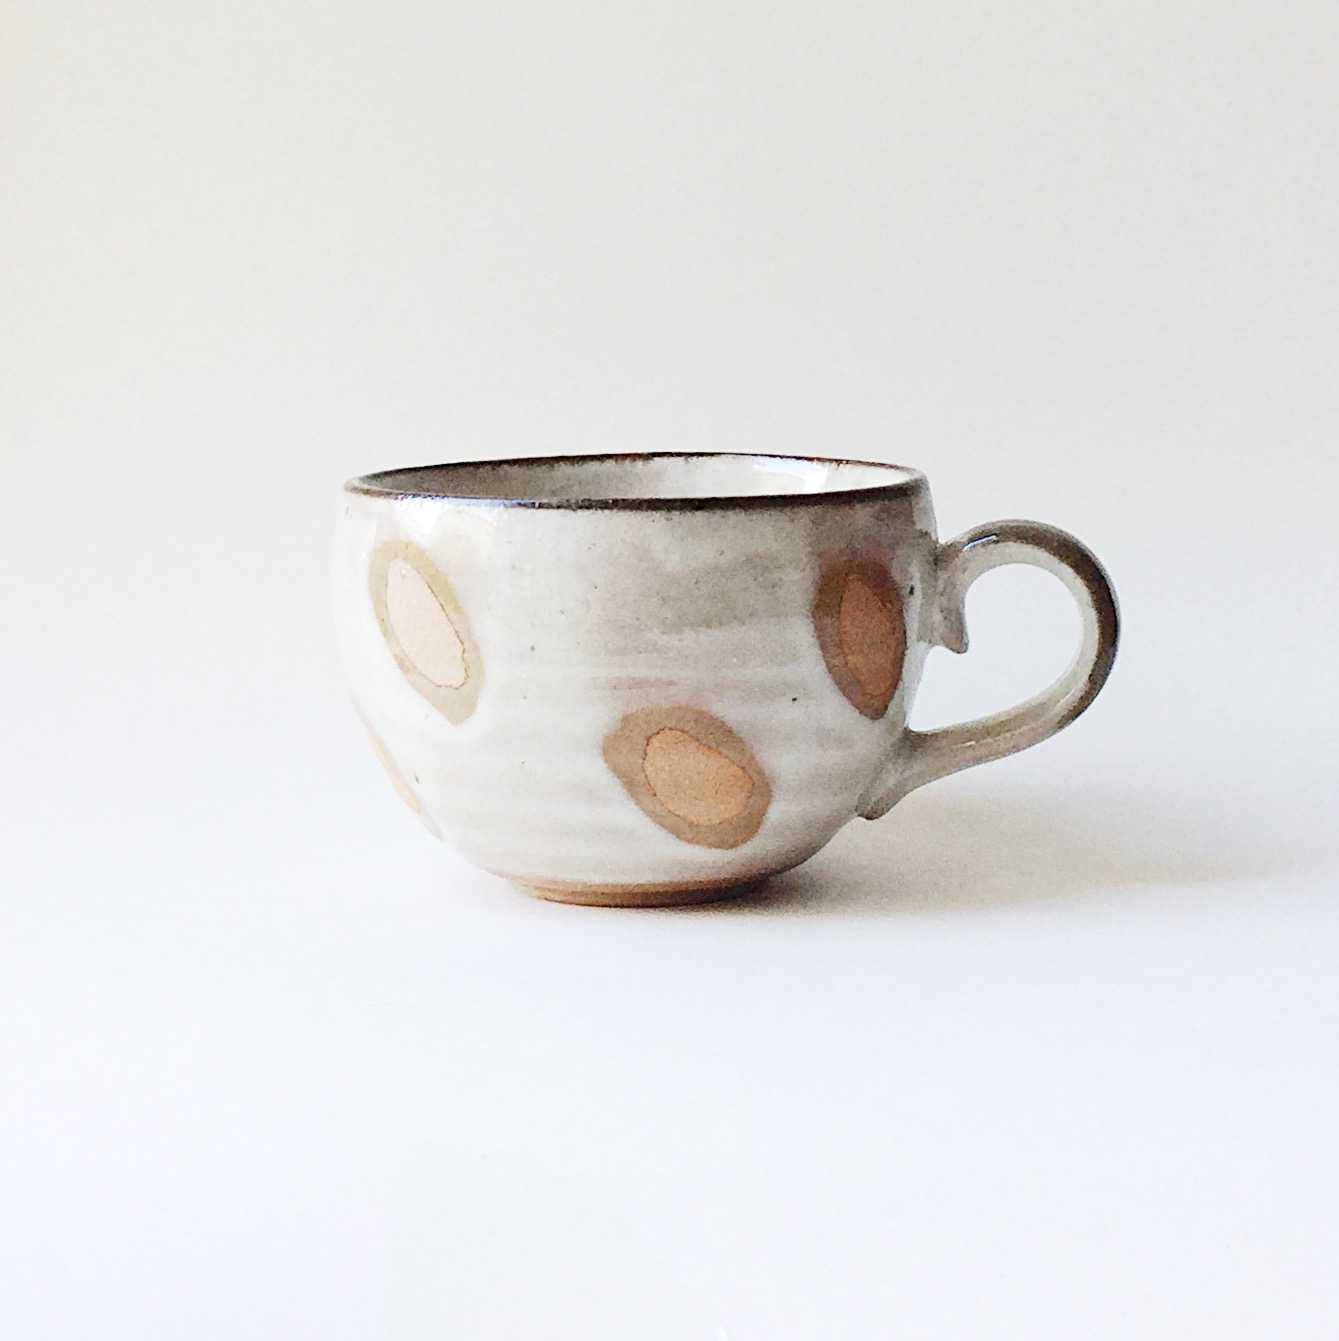 The Japan Collection : White cup with spots